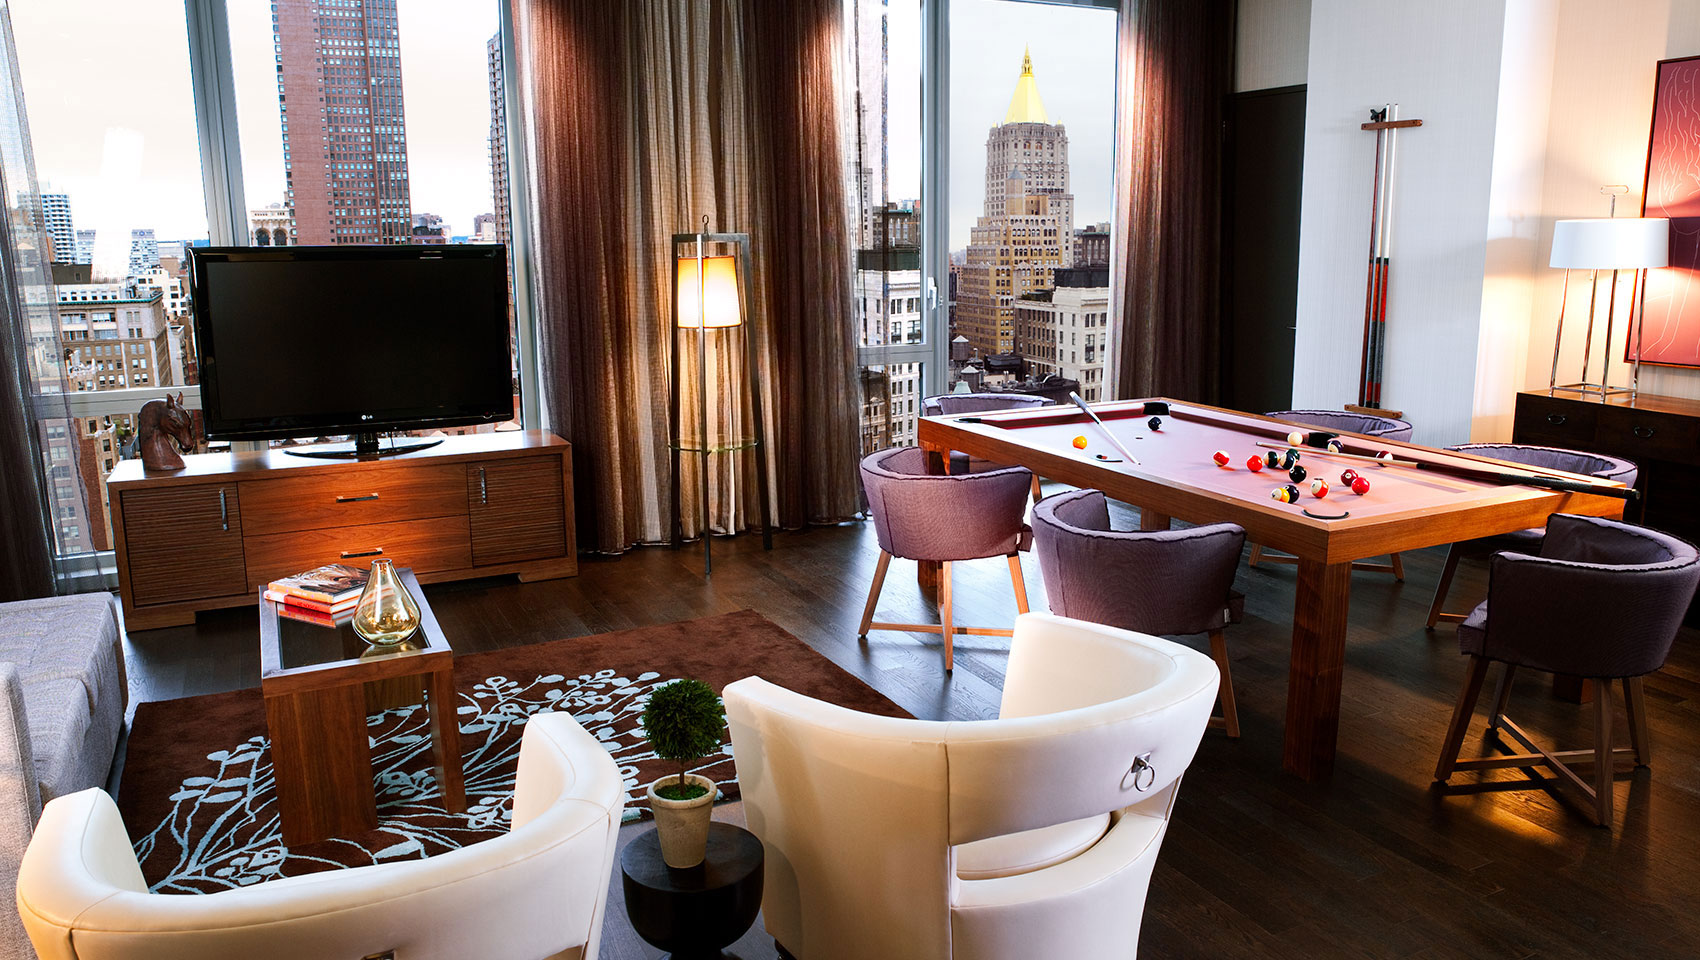 Kimpton Hotel Eventi suite living area with pool table and surrounding seating and views of city buildings